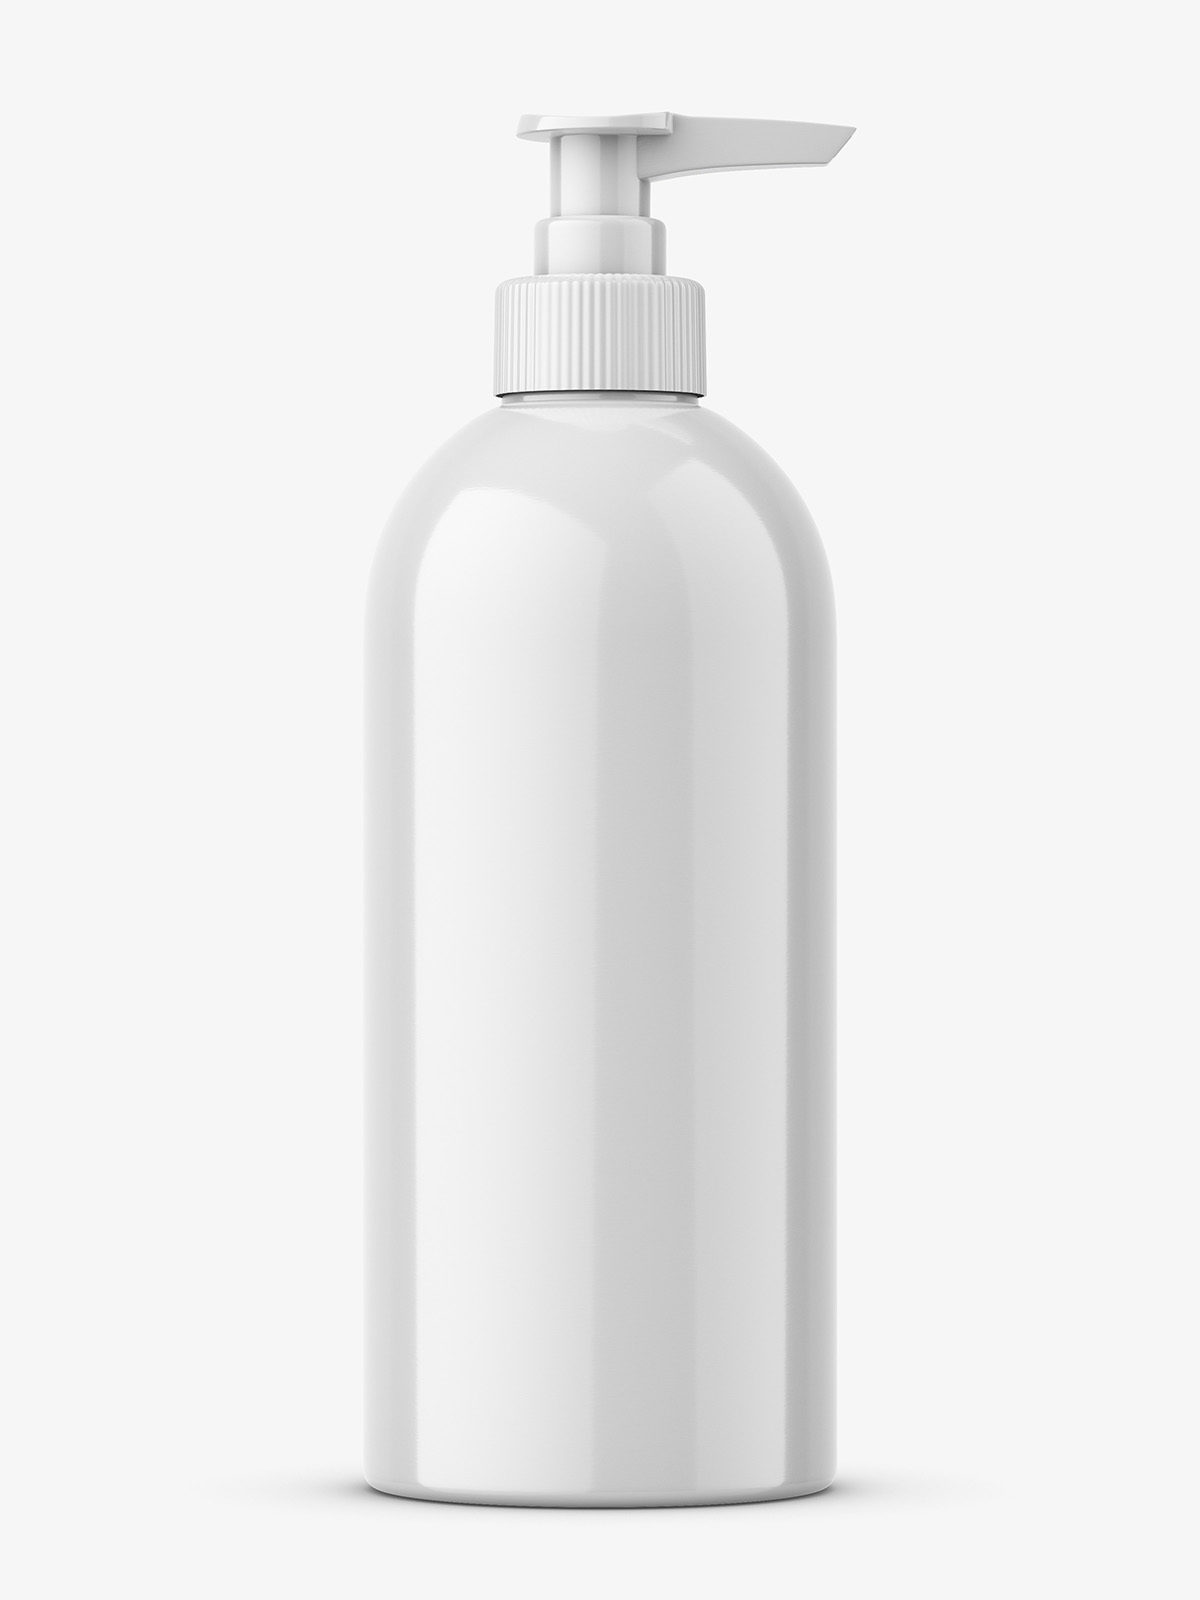 Download Plastic Glossy Bottle With Pump Mockup Smarty Mockups PSD Mockup Templates